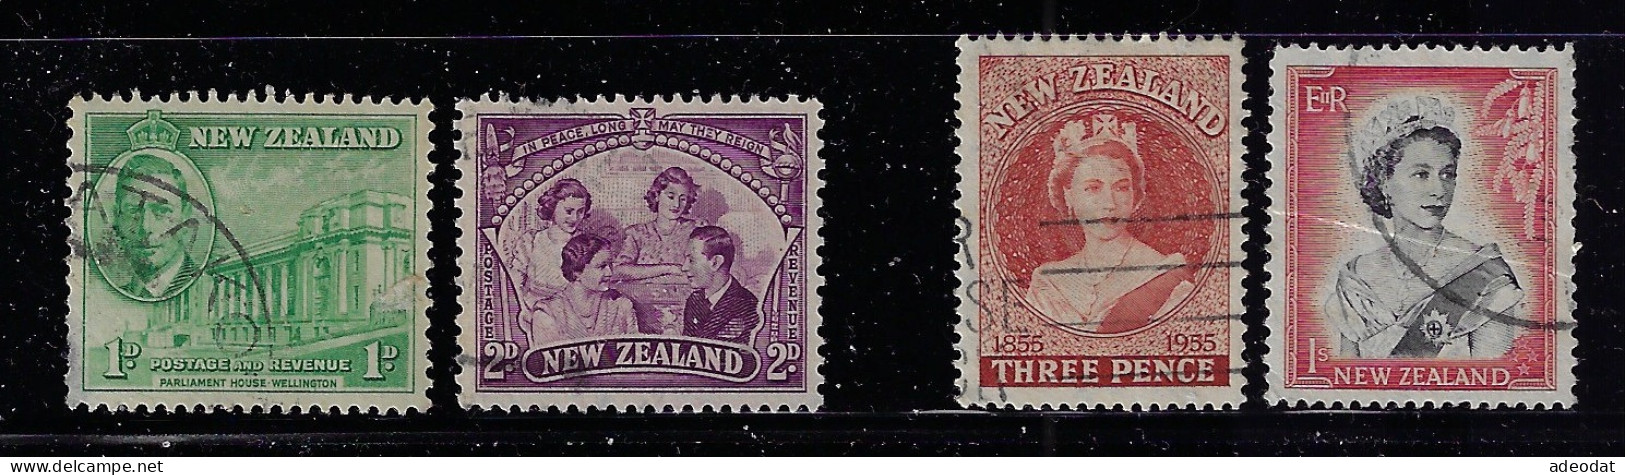 NEW ZEALAND 1946,1955 PARLIAMENT HOUSE,ROYAL FAMILY,THE QUEEN  SCOTT #248,250,297,303 USED - Usati